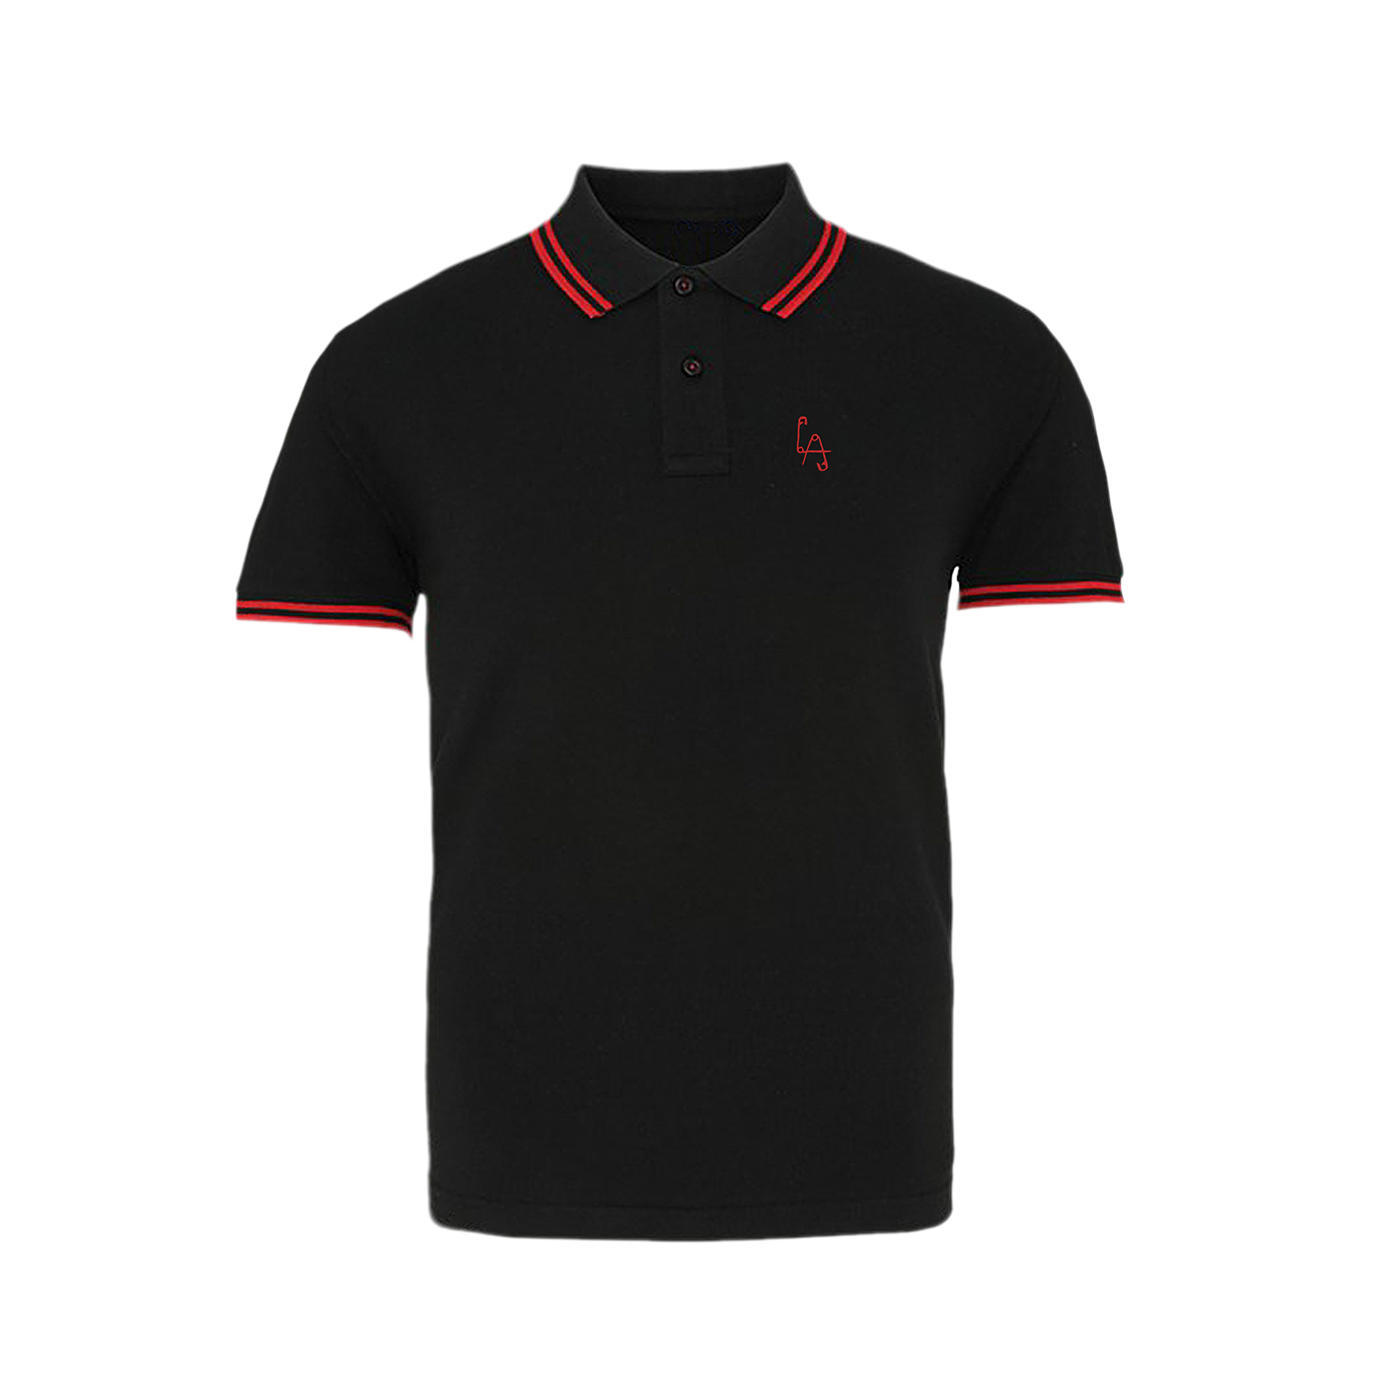 Oi! Boi - Embroidered LA Safety Pins polo shirt - BLACK/RED